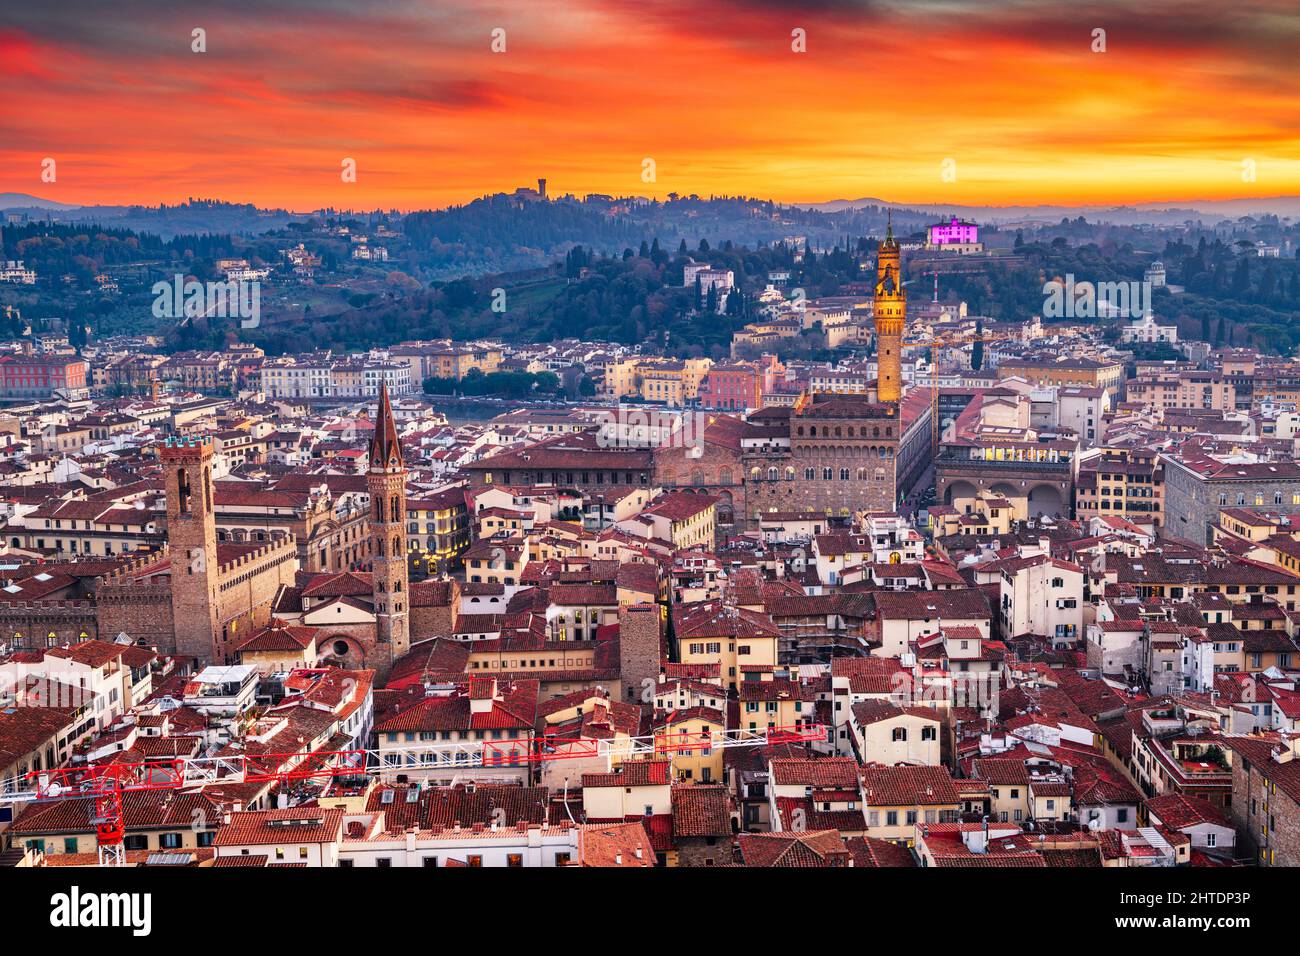 Florence, Italy aerial view at sunset with famous historic landmarks and towers. Stock Photo